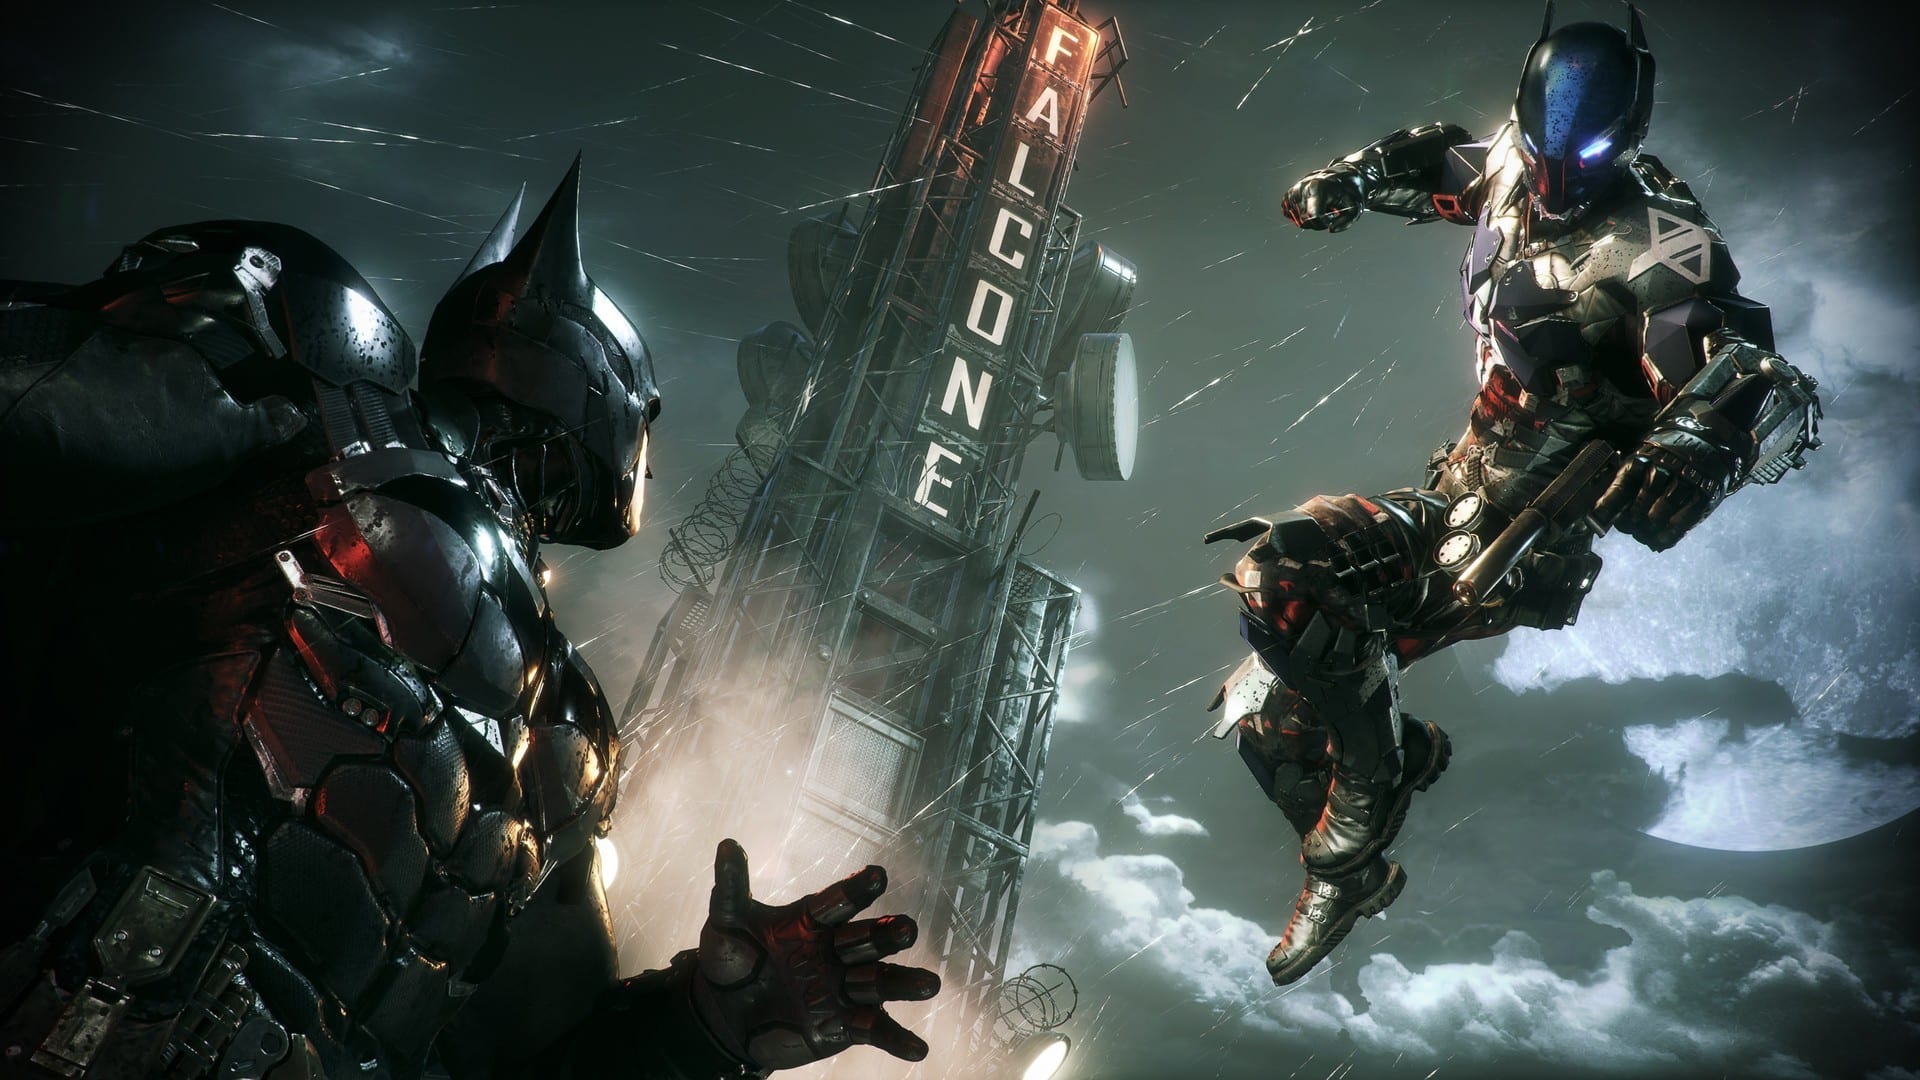 Batman Arkham Knight: Is There a Difficulty Trophy & Achievement